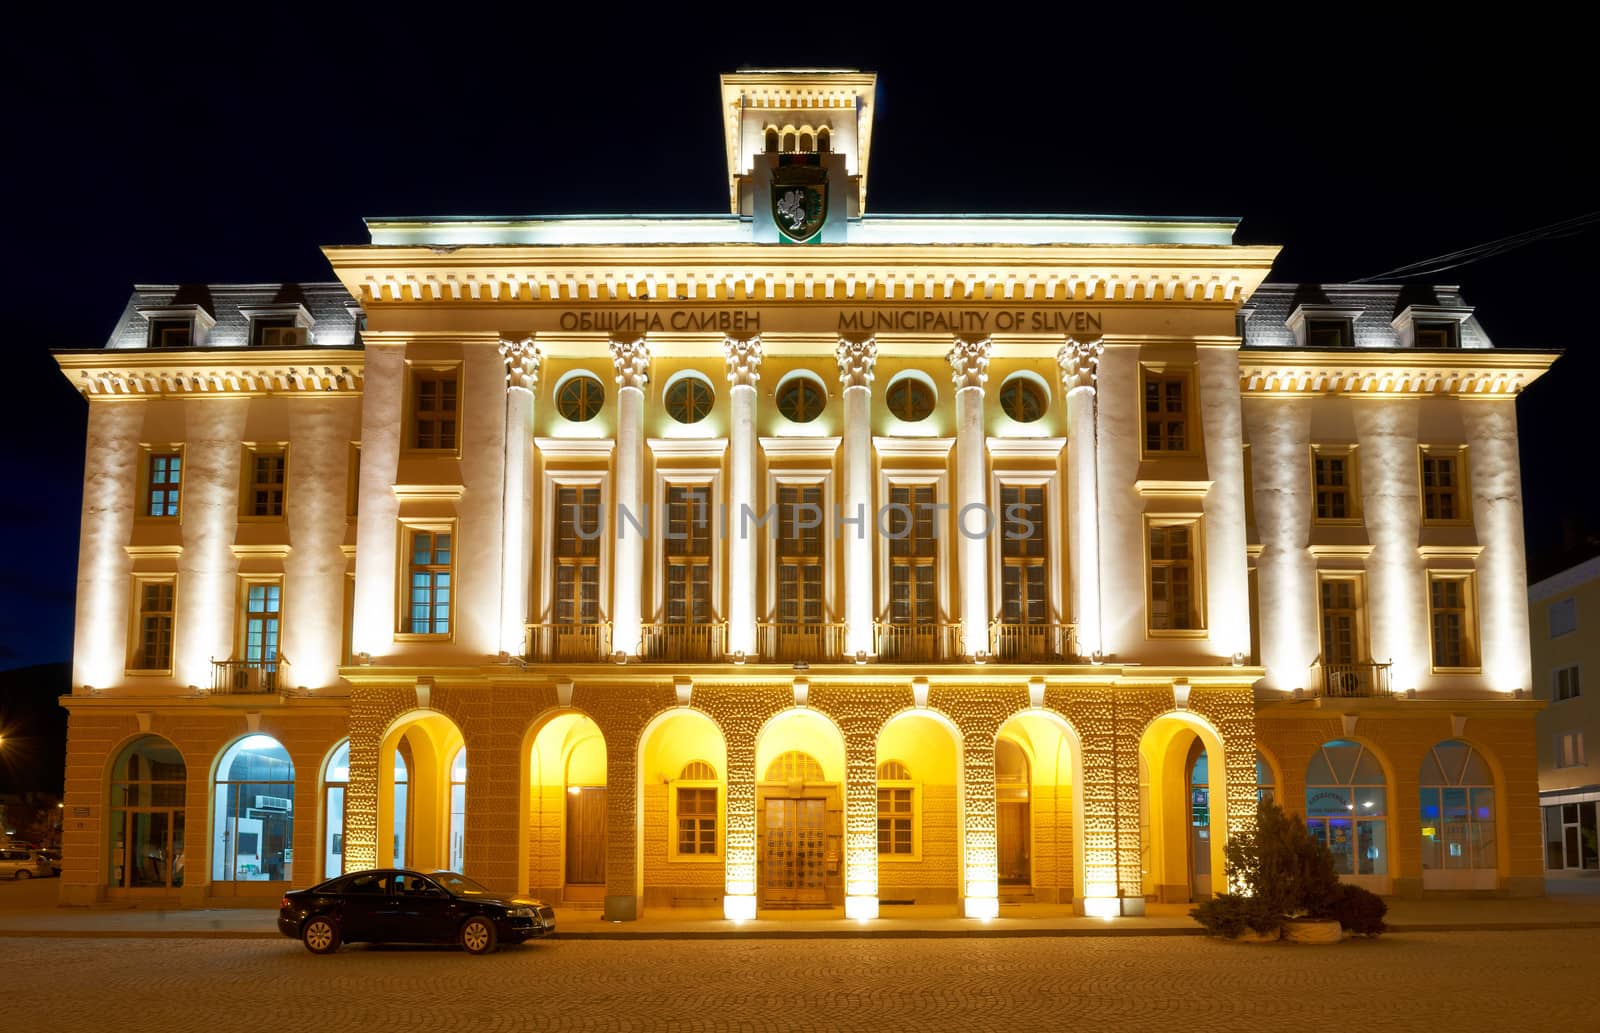 The city hall of Sliven at night